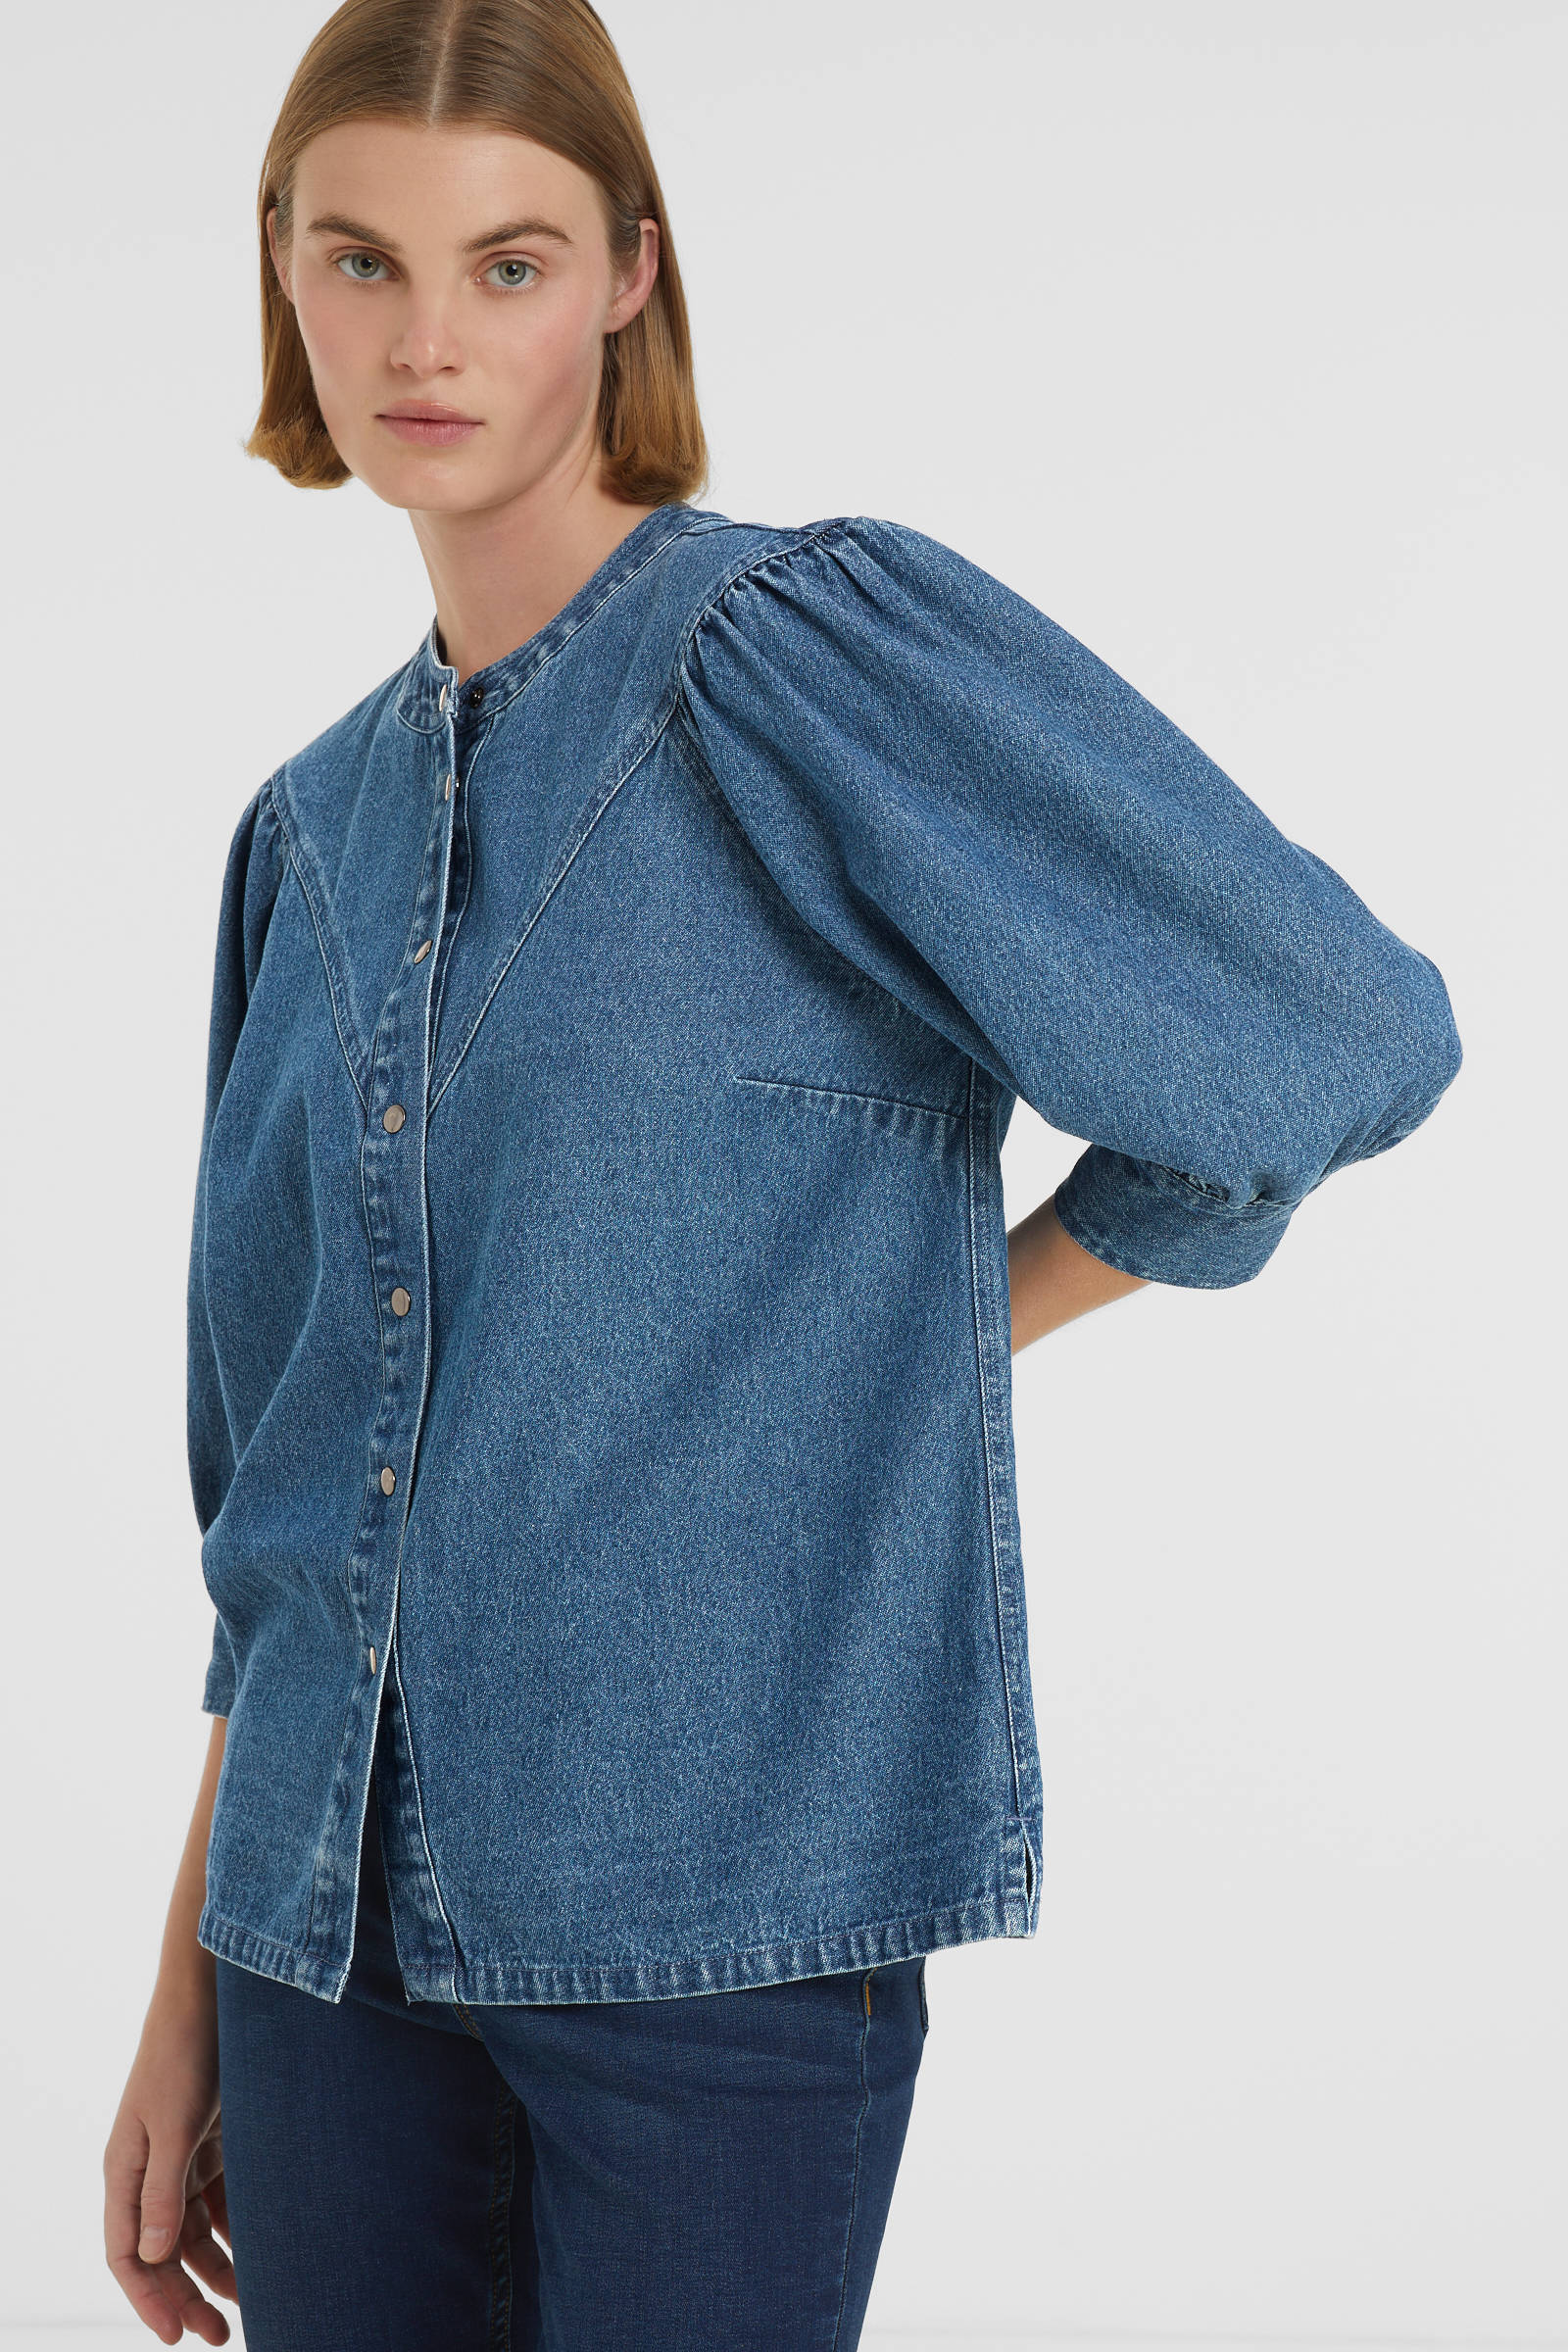 Guess Jeans blouse korenblauw-donkerblauw Jeans-look Mode Blouses Jeans blouses 